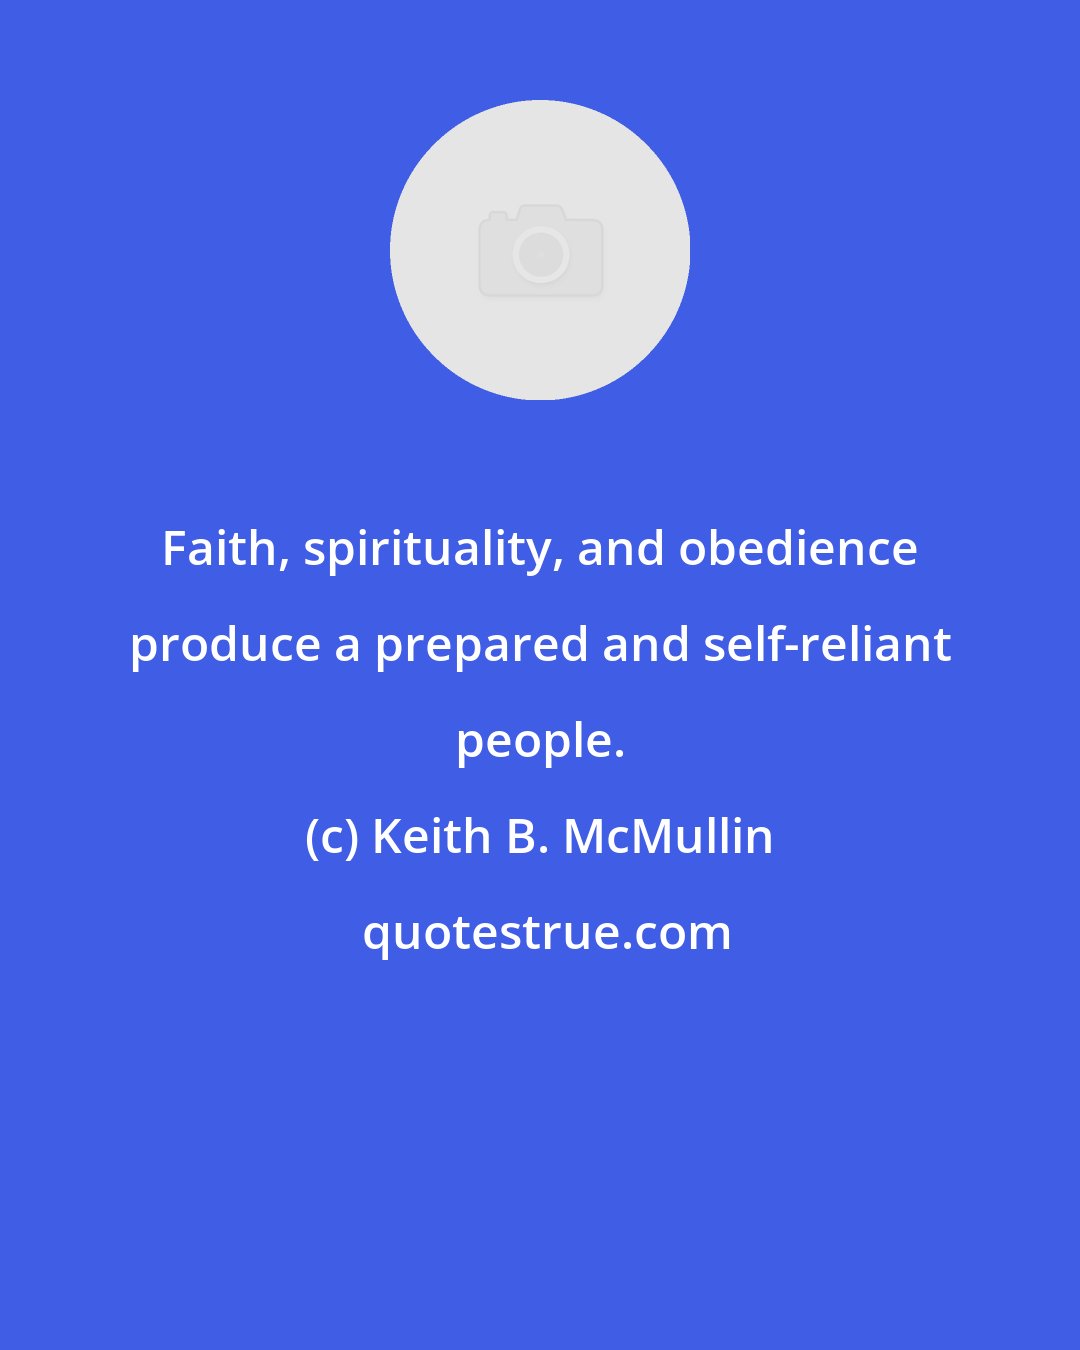 Keith B. McMullin: Faith, spirituality, and obedience produce a prepared and self-reliant people.